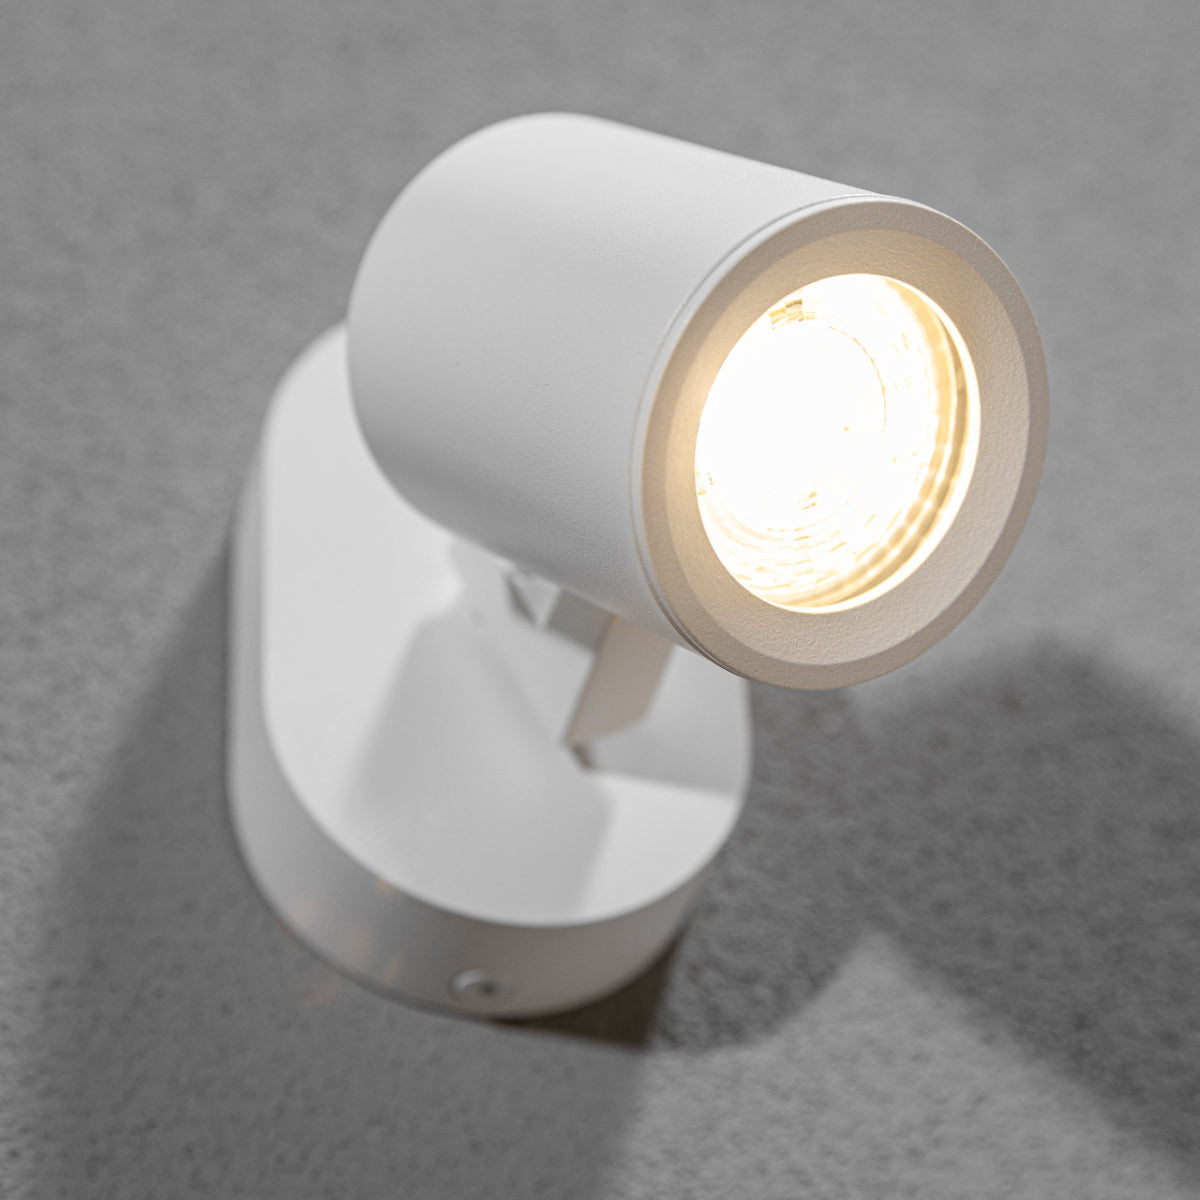 We combine practicality with atmosphere, the result is the Carla series. These universal spots can be used wherever you would like. The sleek design will feel like a fits perfectly with all interiors.  Adjustable to give the desired light output exactly where you want the light to beam. These lights are made from a high quality aluminum and powder coated to white immaculate finish.